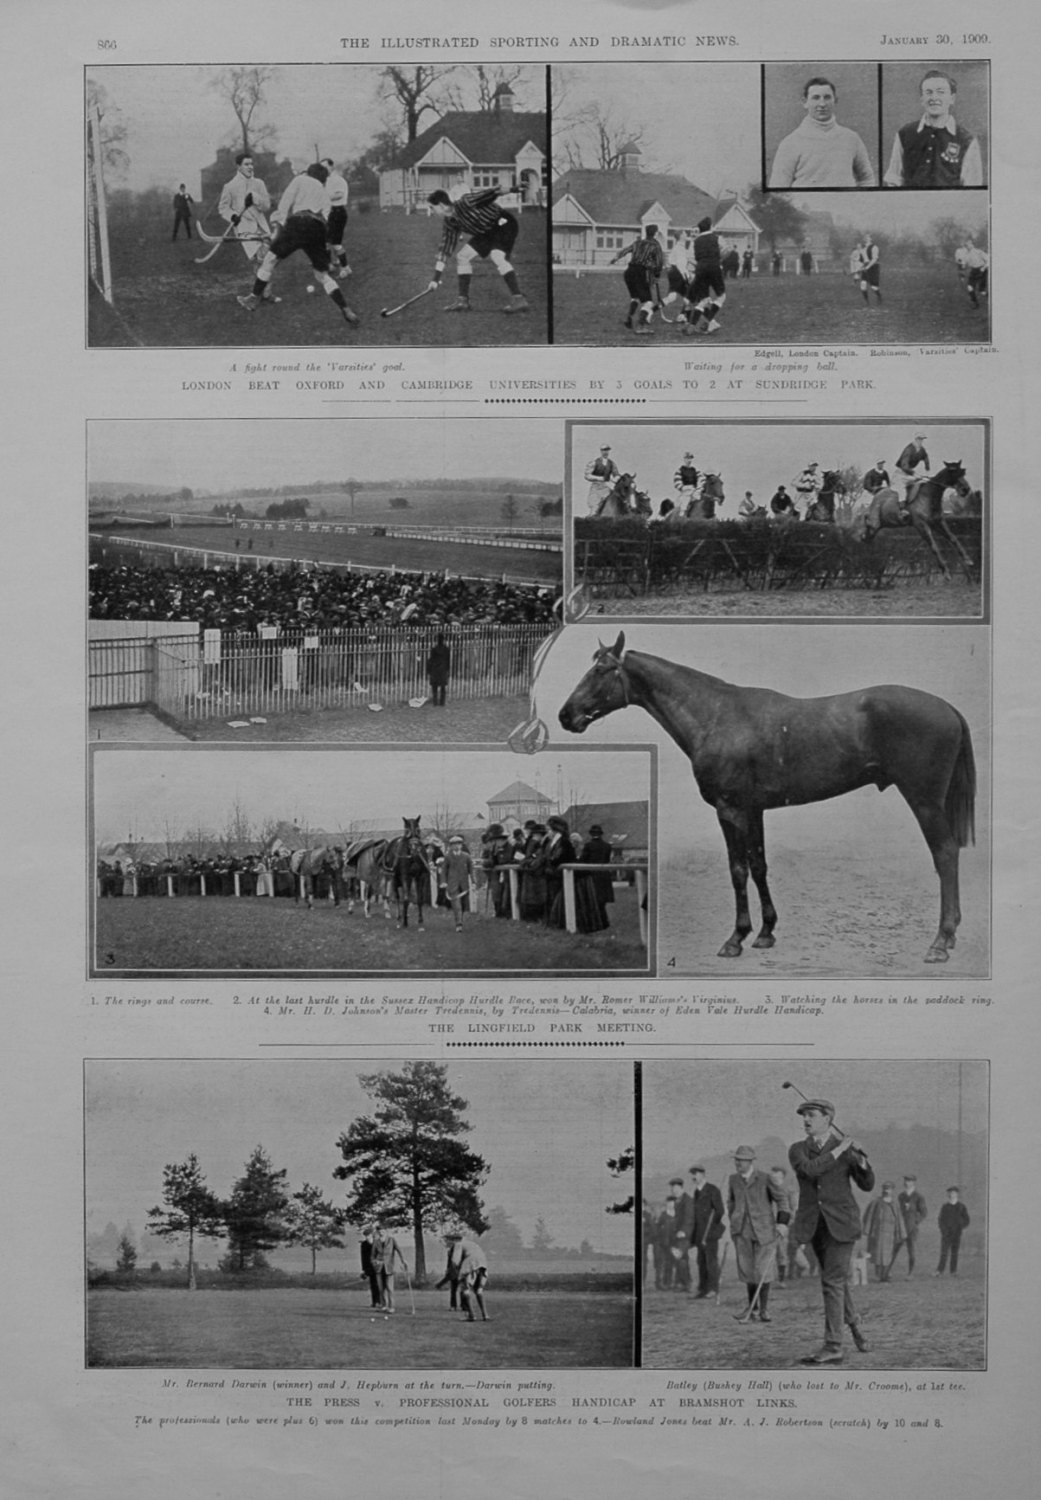 The Lingfield Park Meeting. 1909.